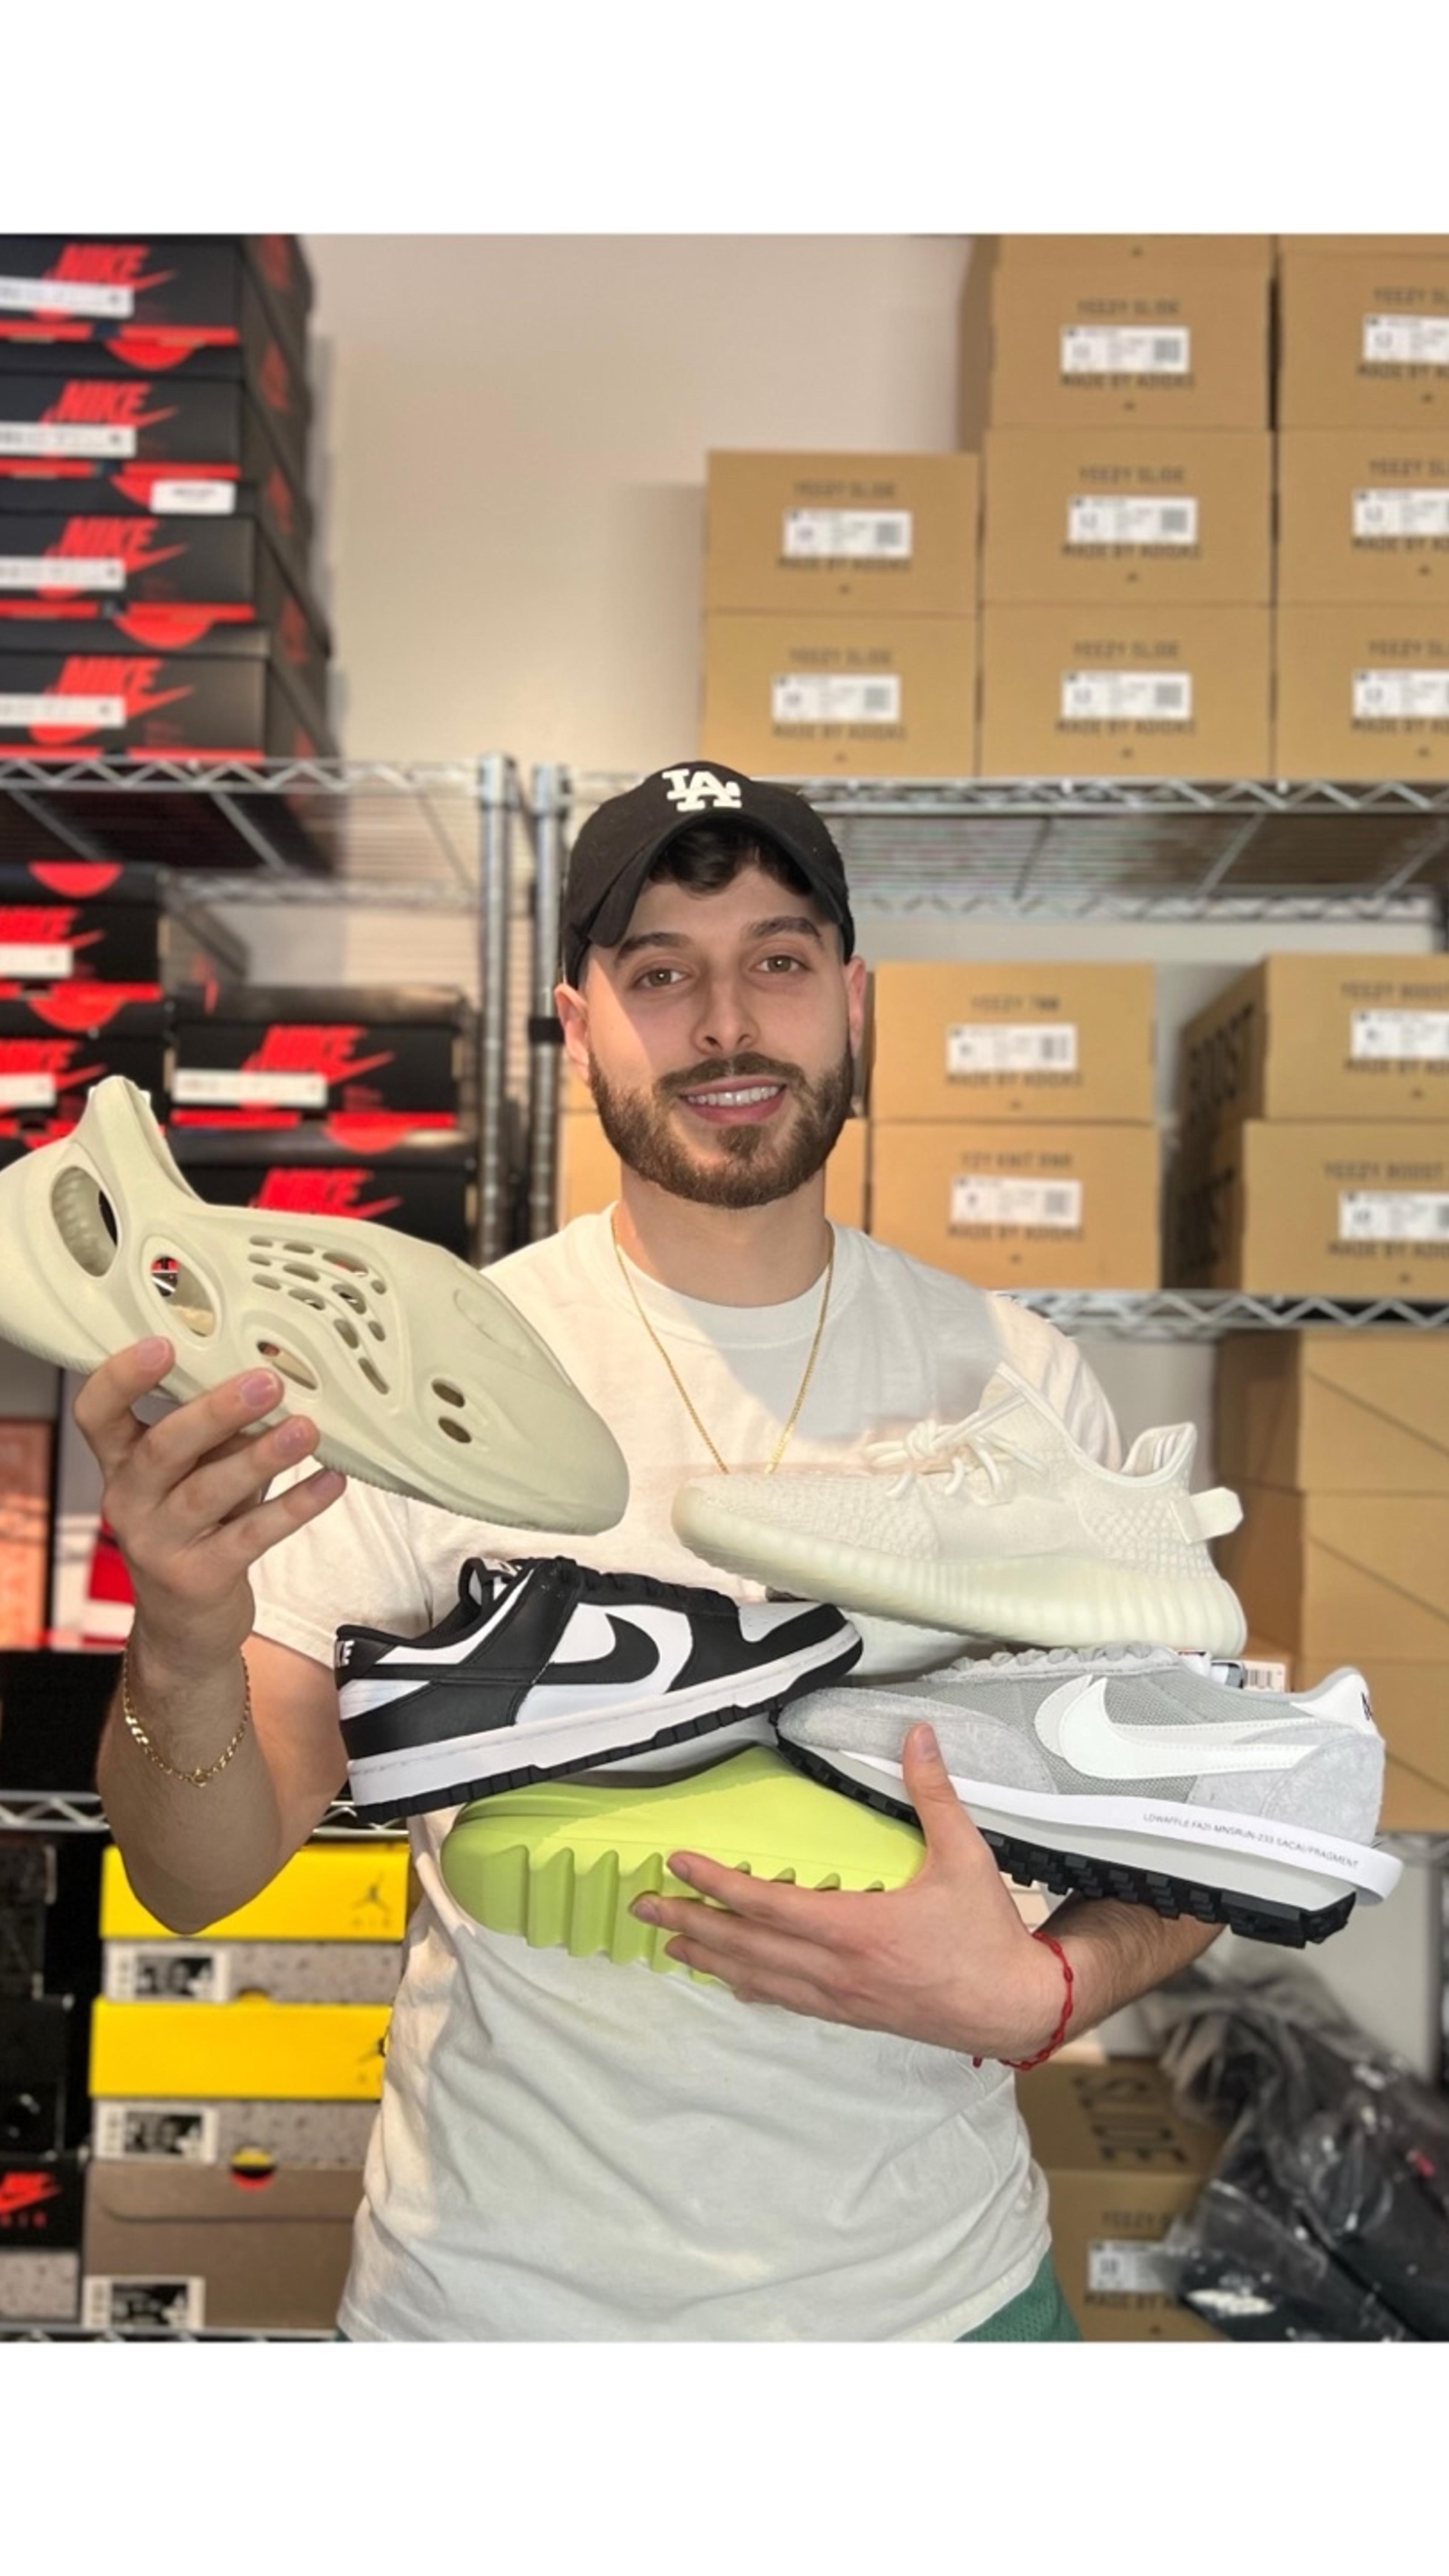 Preview image for the show titled "Sneaker Auctions!!" at May 16, 2024